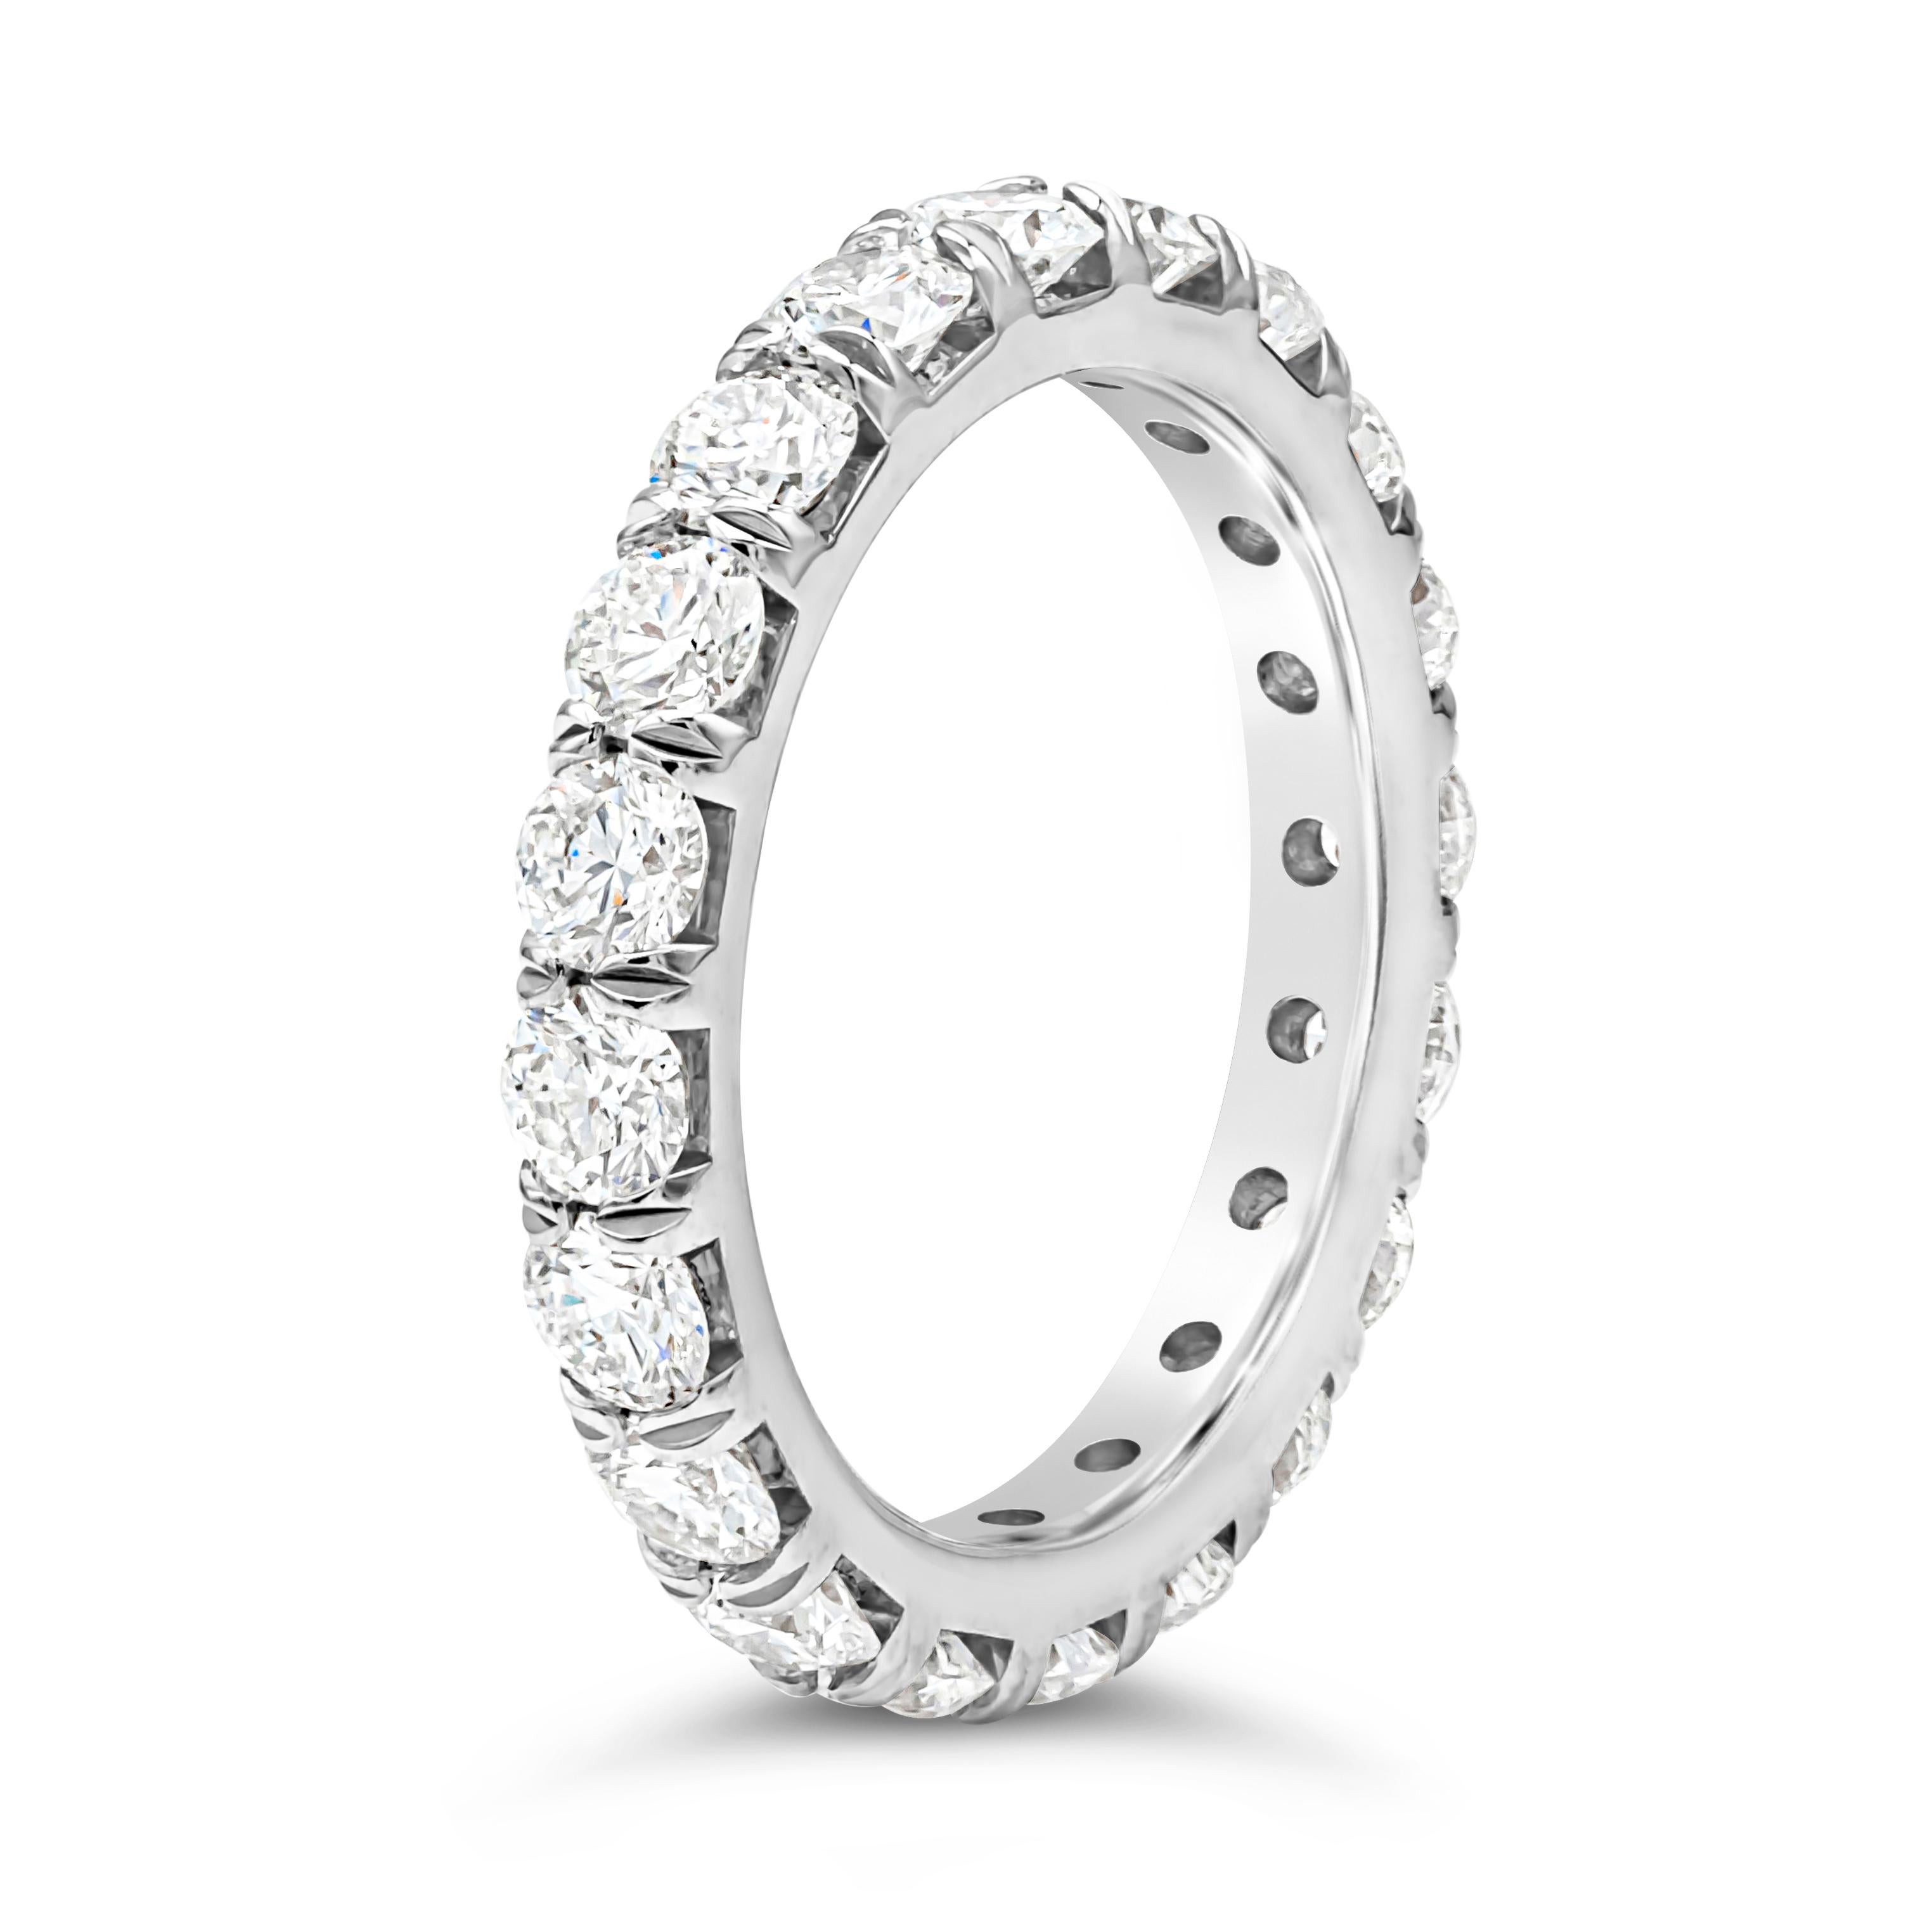 A classy and simple eternity wedding band showcasing a line of 20 brilliant round cut diamonds weighing 2.45 carats total, G color and VS in clarity, set in a four prong basket setting and French pave set. Finely made in platinum. Size 6.5 US